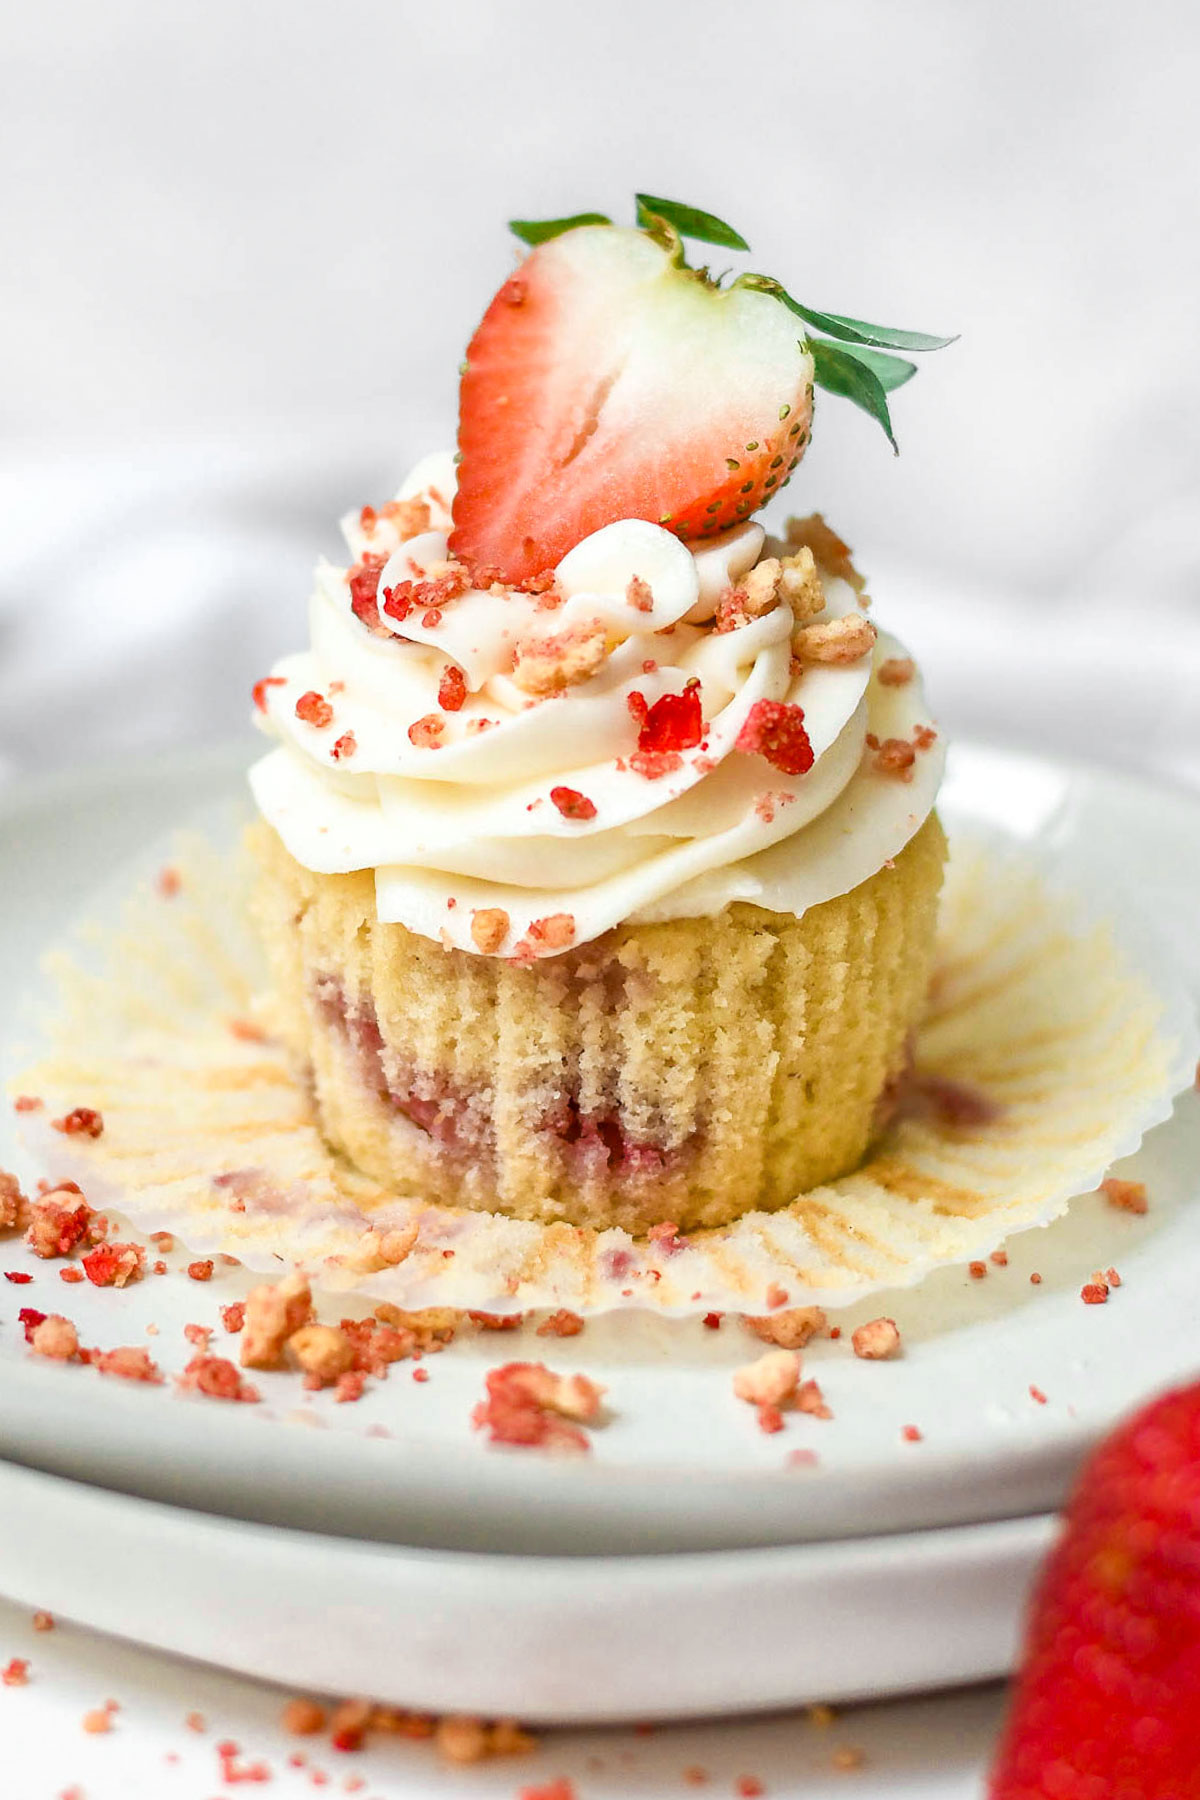 Unwrapped strawberry crunch cupcake with cream cheese frosting on top and garnished with strawberry.